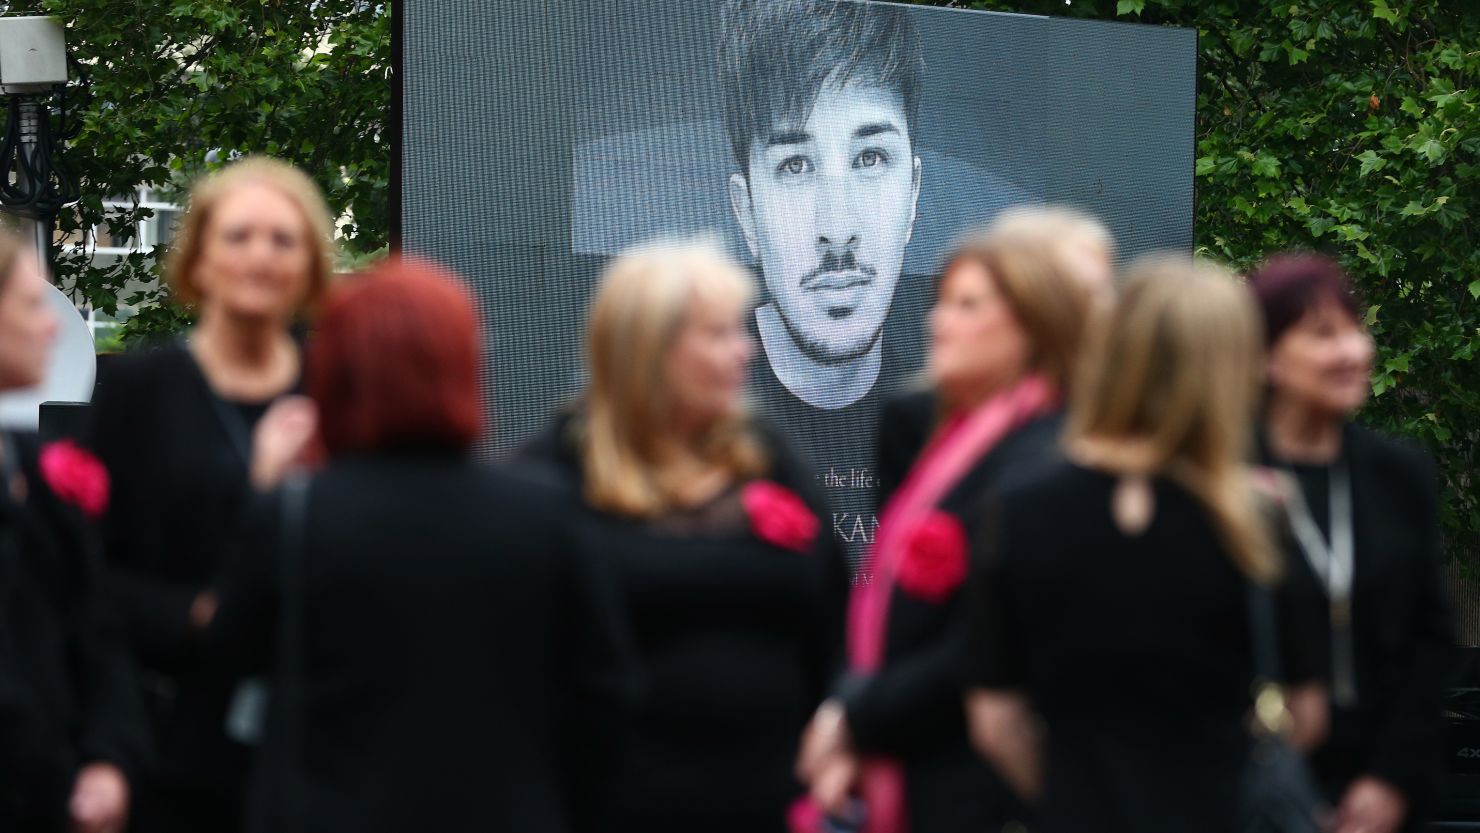 Martyn Hett's funeral service was relayed on large screens at Stockport Town Hall for the crowd outside.